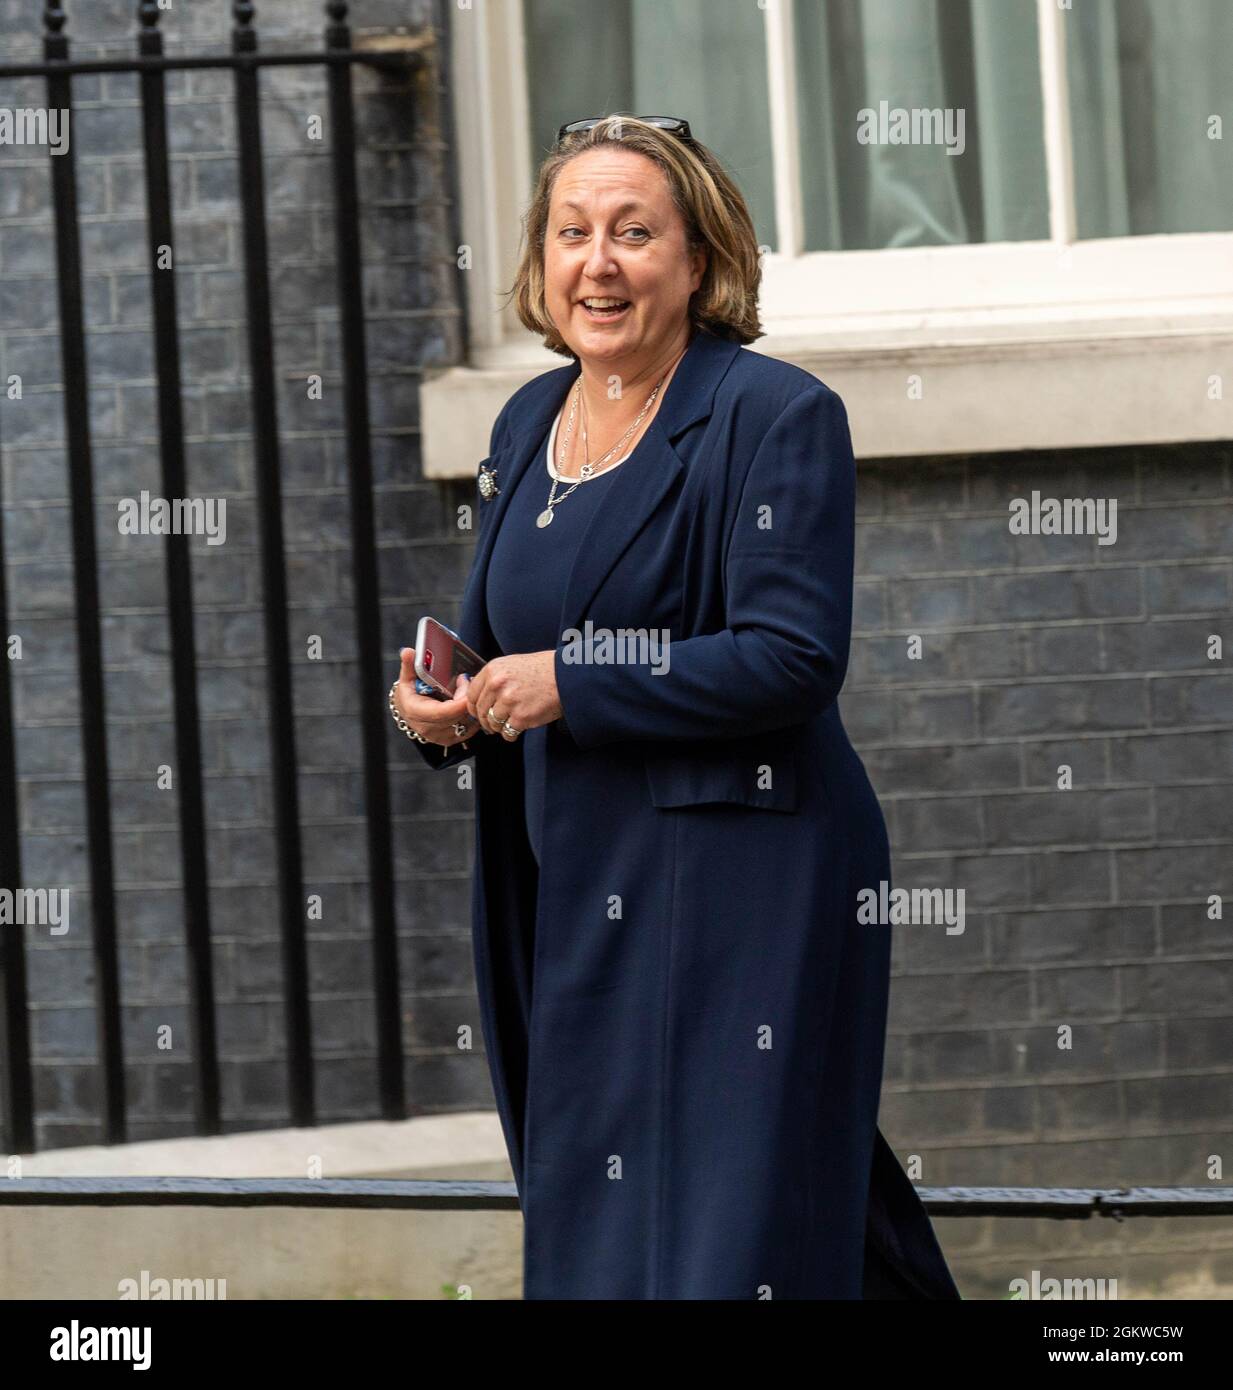 London, UK. 15th Sep, 2021. Cabinet reshuffled Downing Street London Anne-Marie Trevelyan leaves her role as business minister and becomes the new Secretary for International Trade Department., Credit: Ian Davidson/Alamy Live News Stock Photo